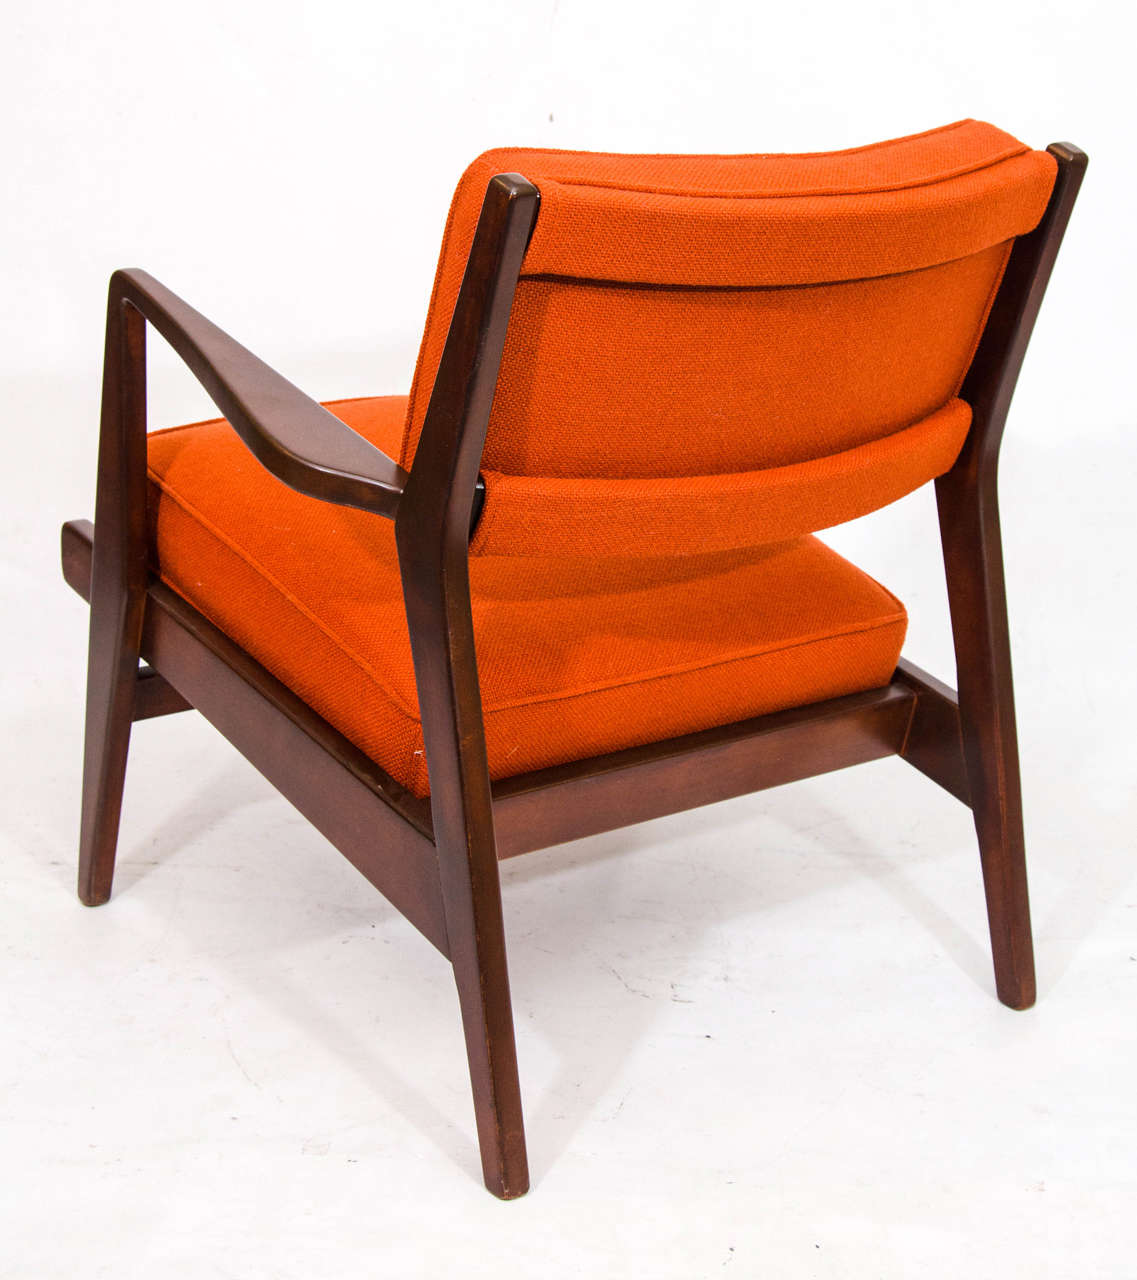 Mid-20th Century Pair of Jens Risom Lounge Chairs